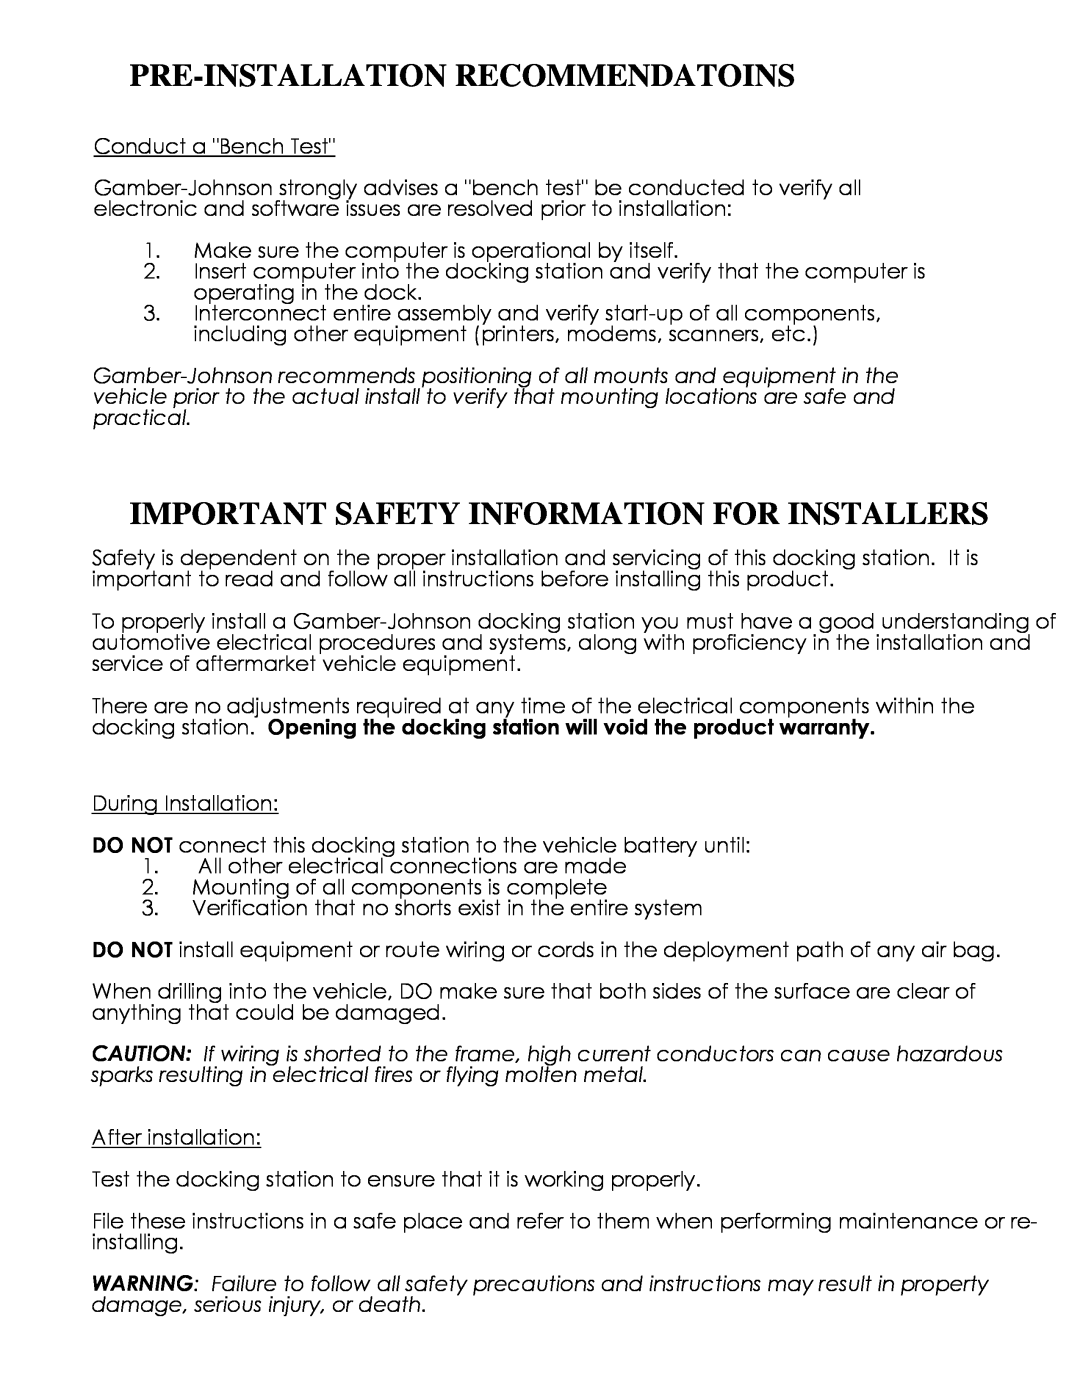 Gamber Johnson 7160-0487, 7160-0486 Pre-Installation Recommendatoins, Important Safety Information For Installers 